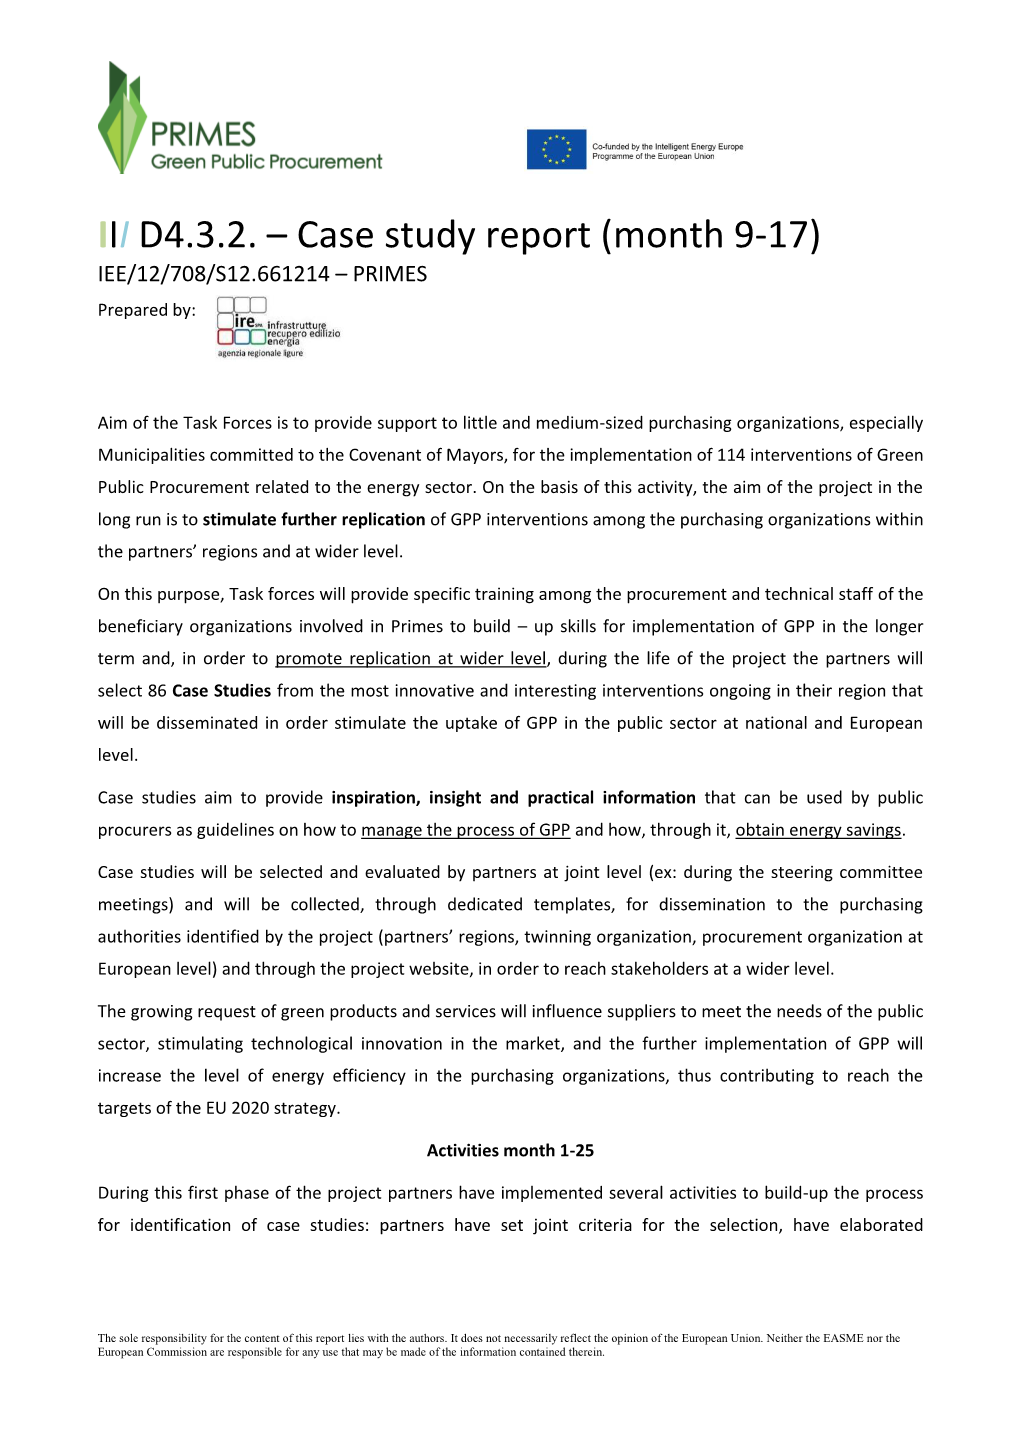 Case Study Report (Month 9-17) IEE/12/708/S12.661214 – PRIMES Prepared By